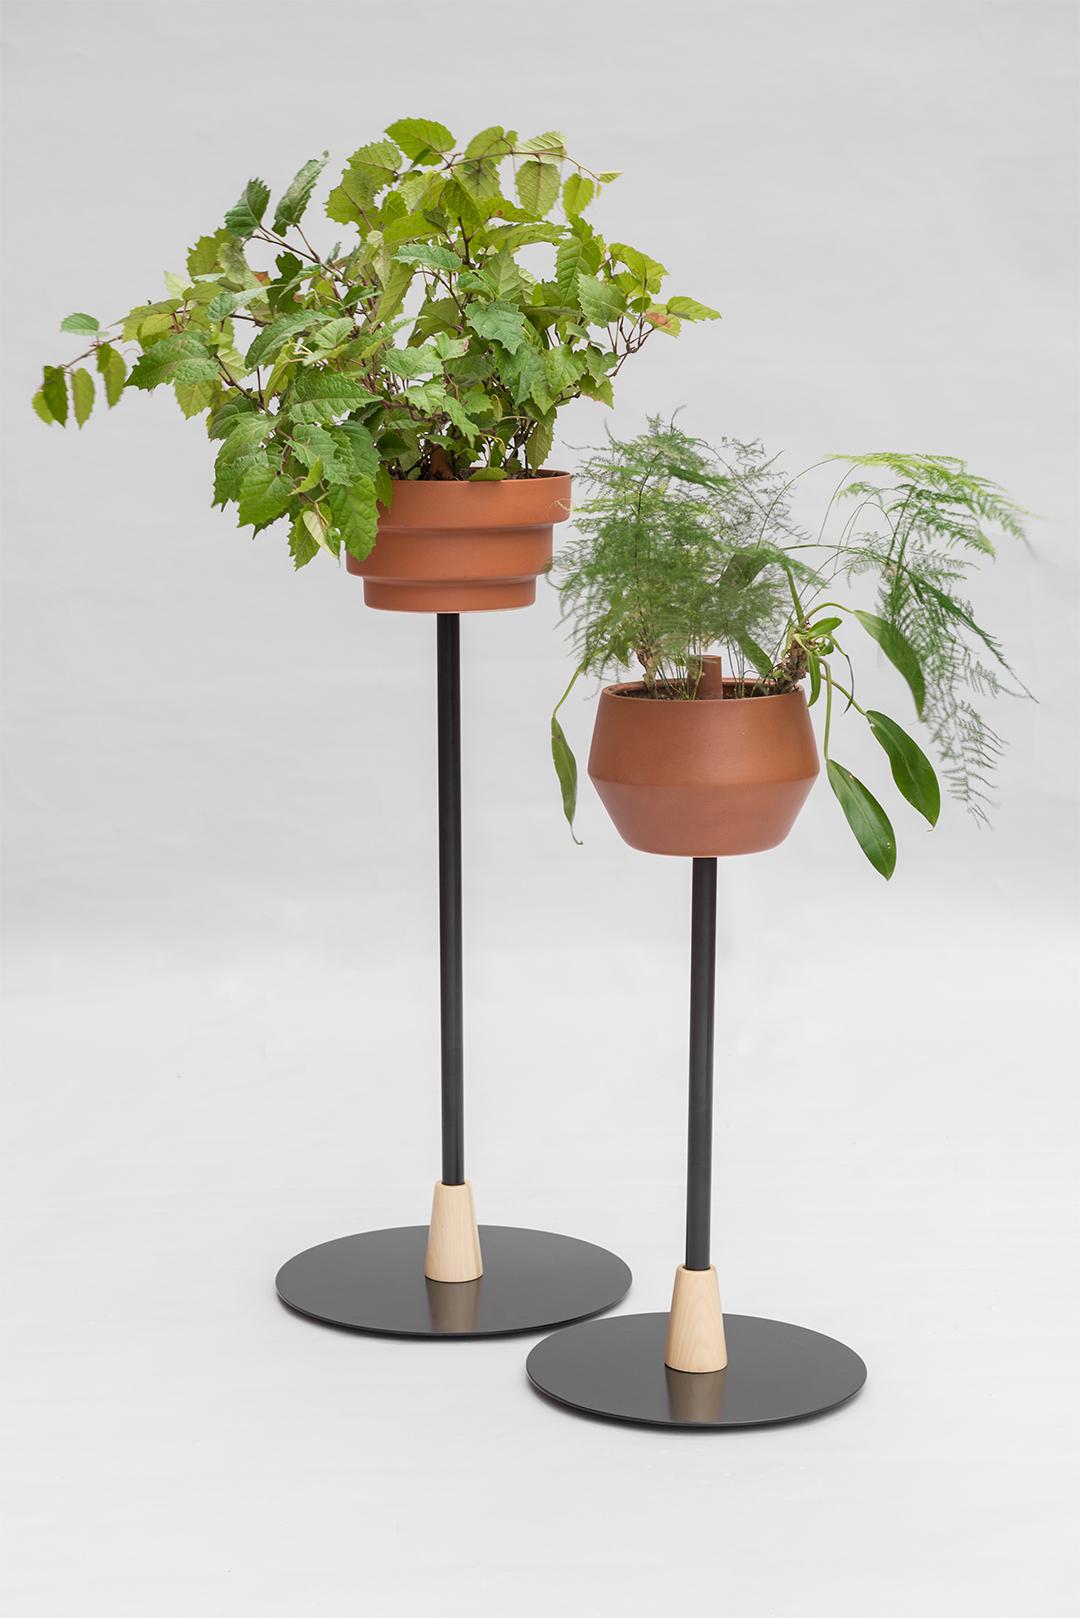 The perfect product to give life to your space! This small metal pedestal with one planter. Costumers can select between 3 different shapes of planters (diamond, tube or pyramid)  that come in 2 different color options (black or terracotta). The